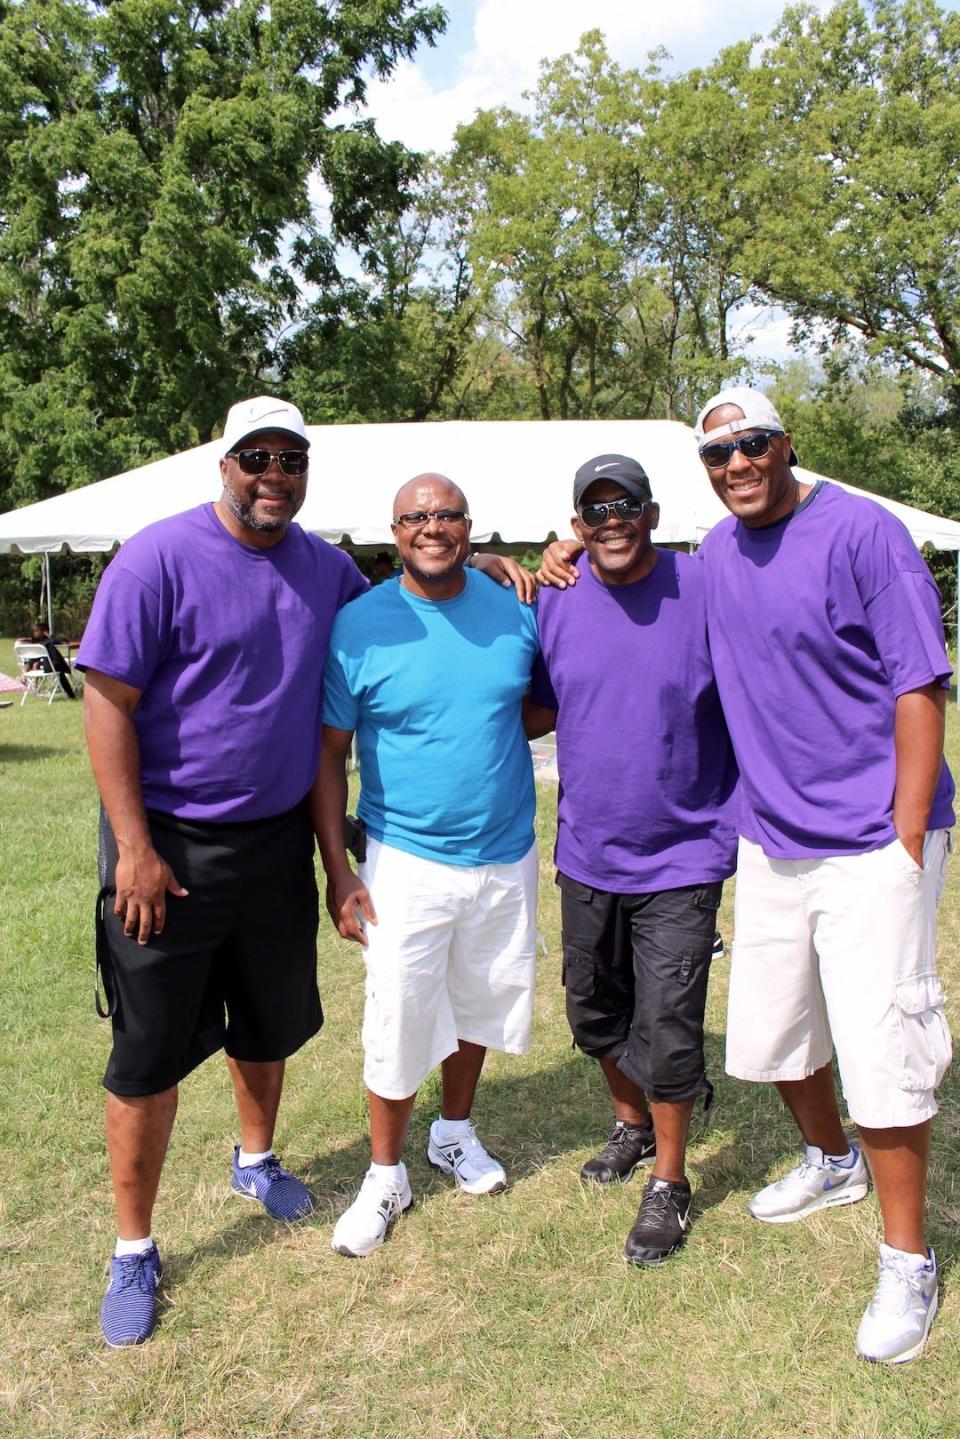 From left to right: Dwayne Stephens Jr., Cornell Mann, Dwayne Stephens Sr. and Jarrett Stephens.